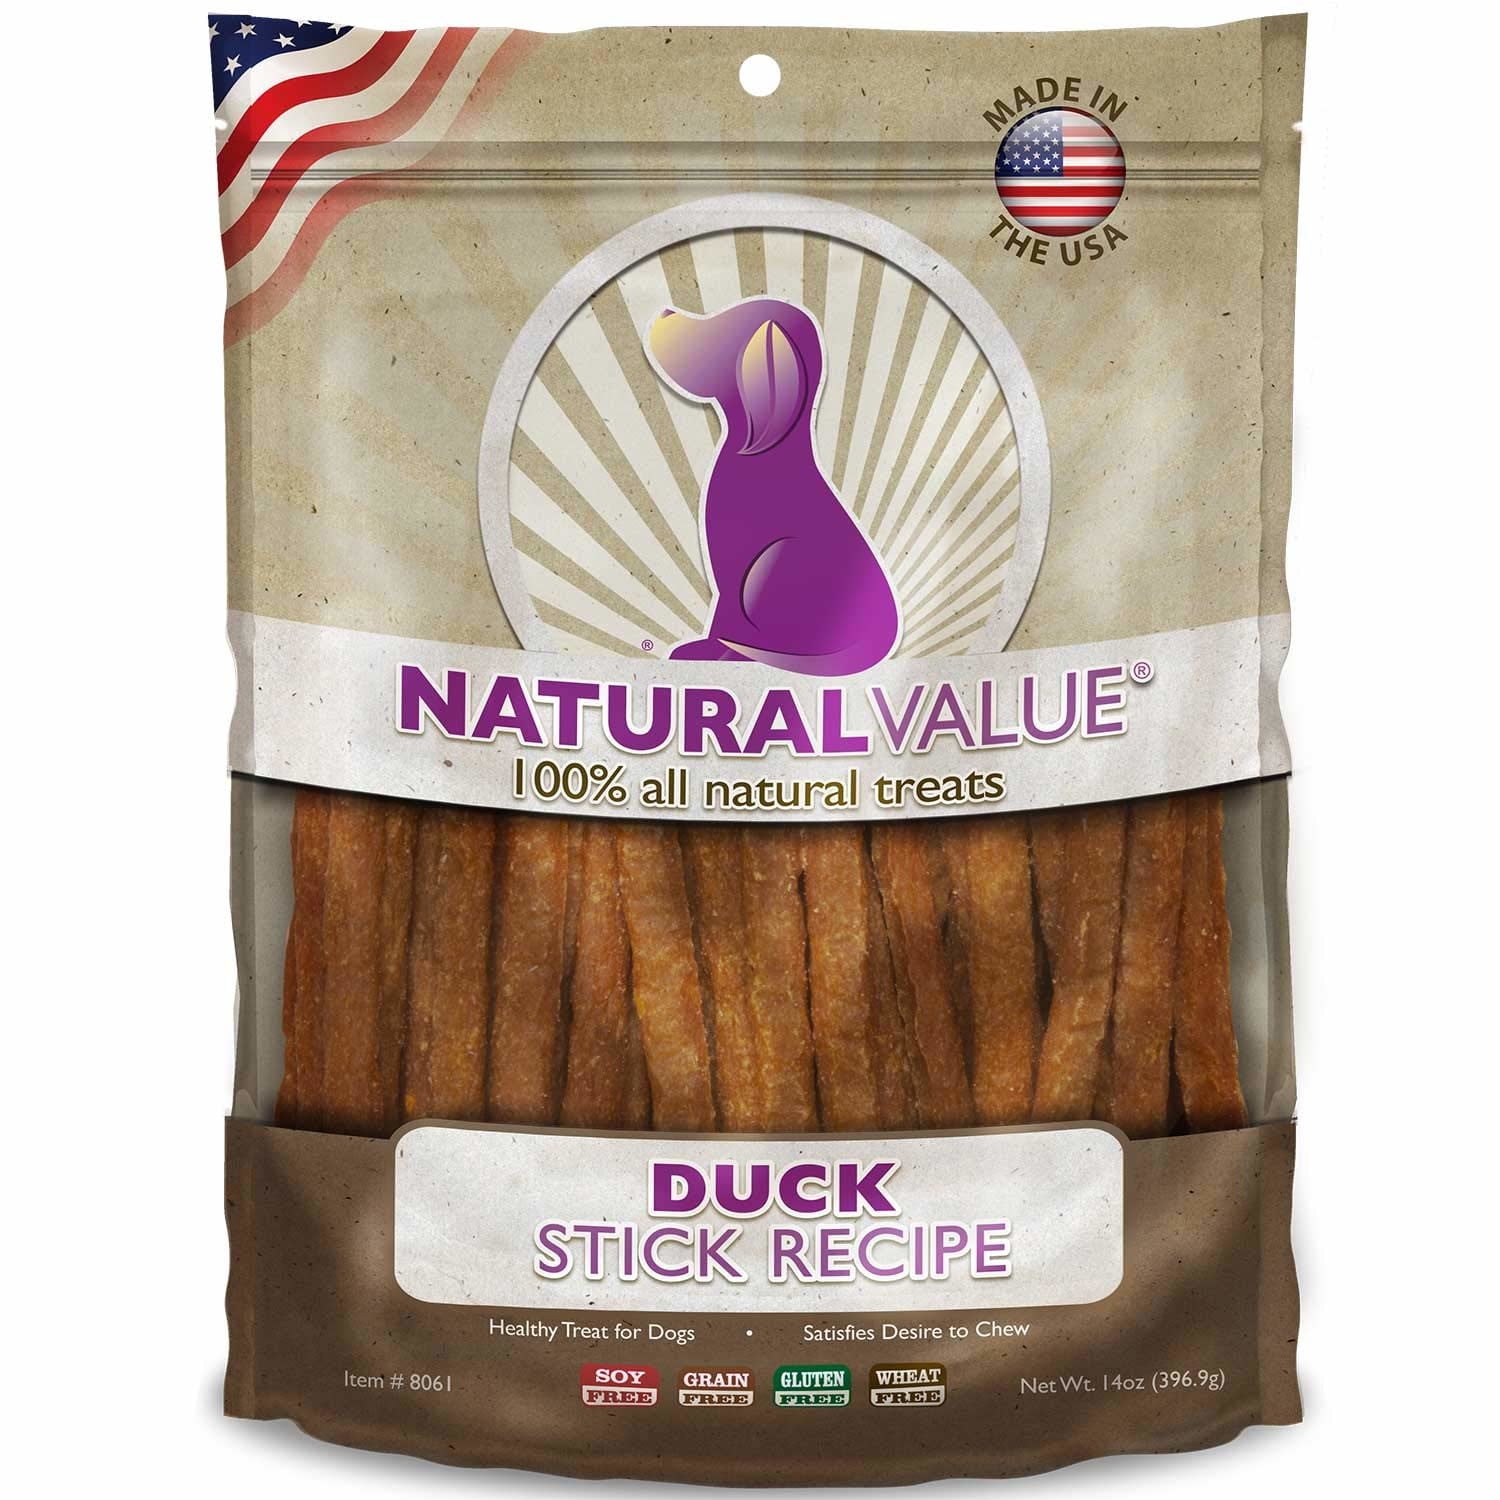 Rawhide Free Dog Treats 90 Grams ℮ Case of 10 Dog Treats Chewy Duck With Carrot Sticks Good Boy Made With 100% Natural Duck Breast Meat